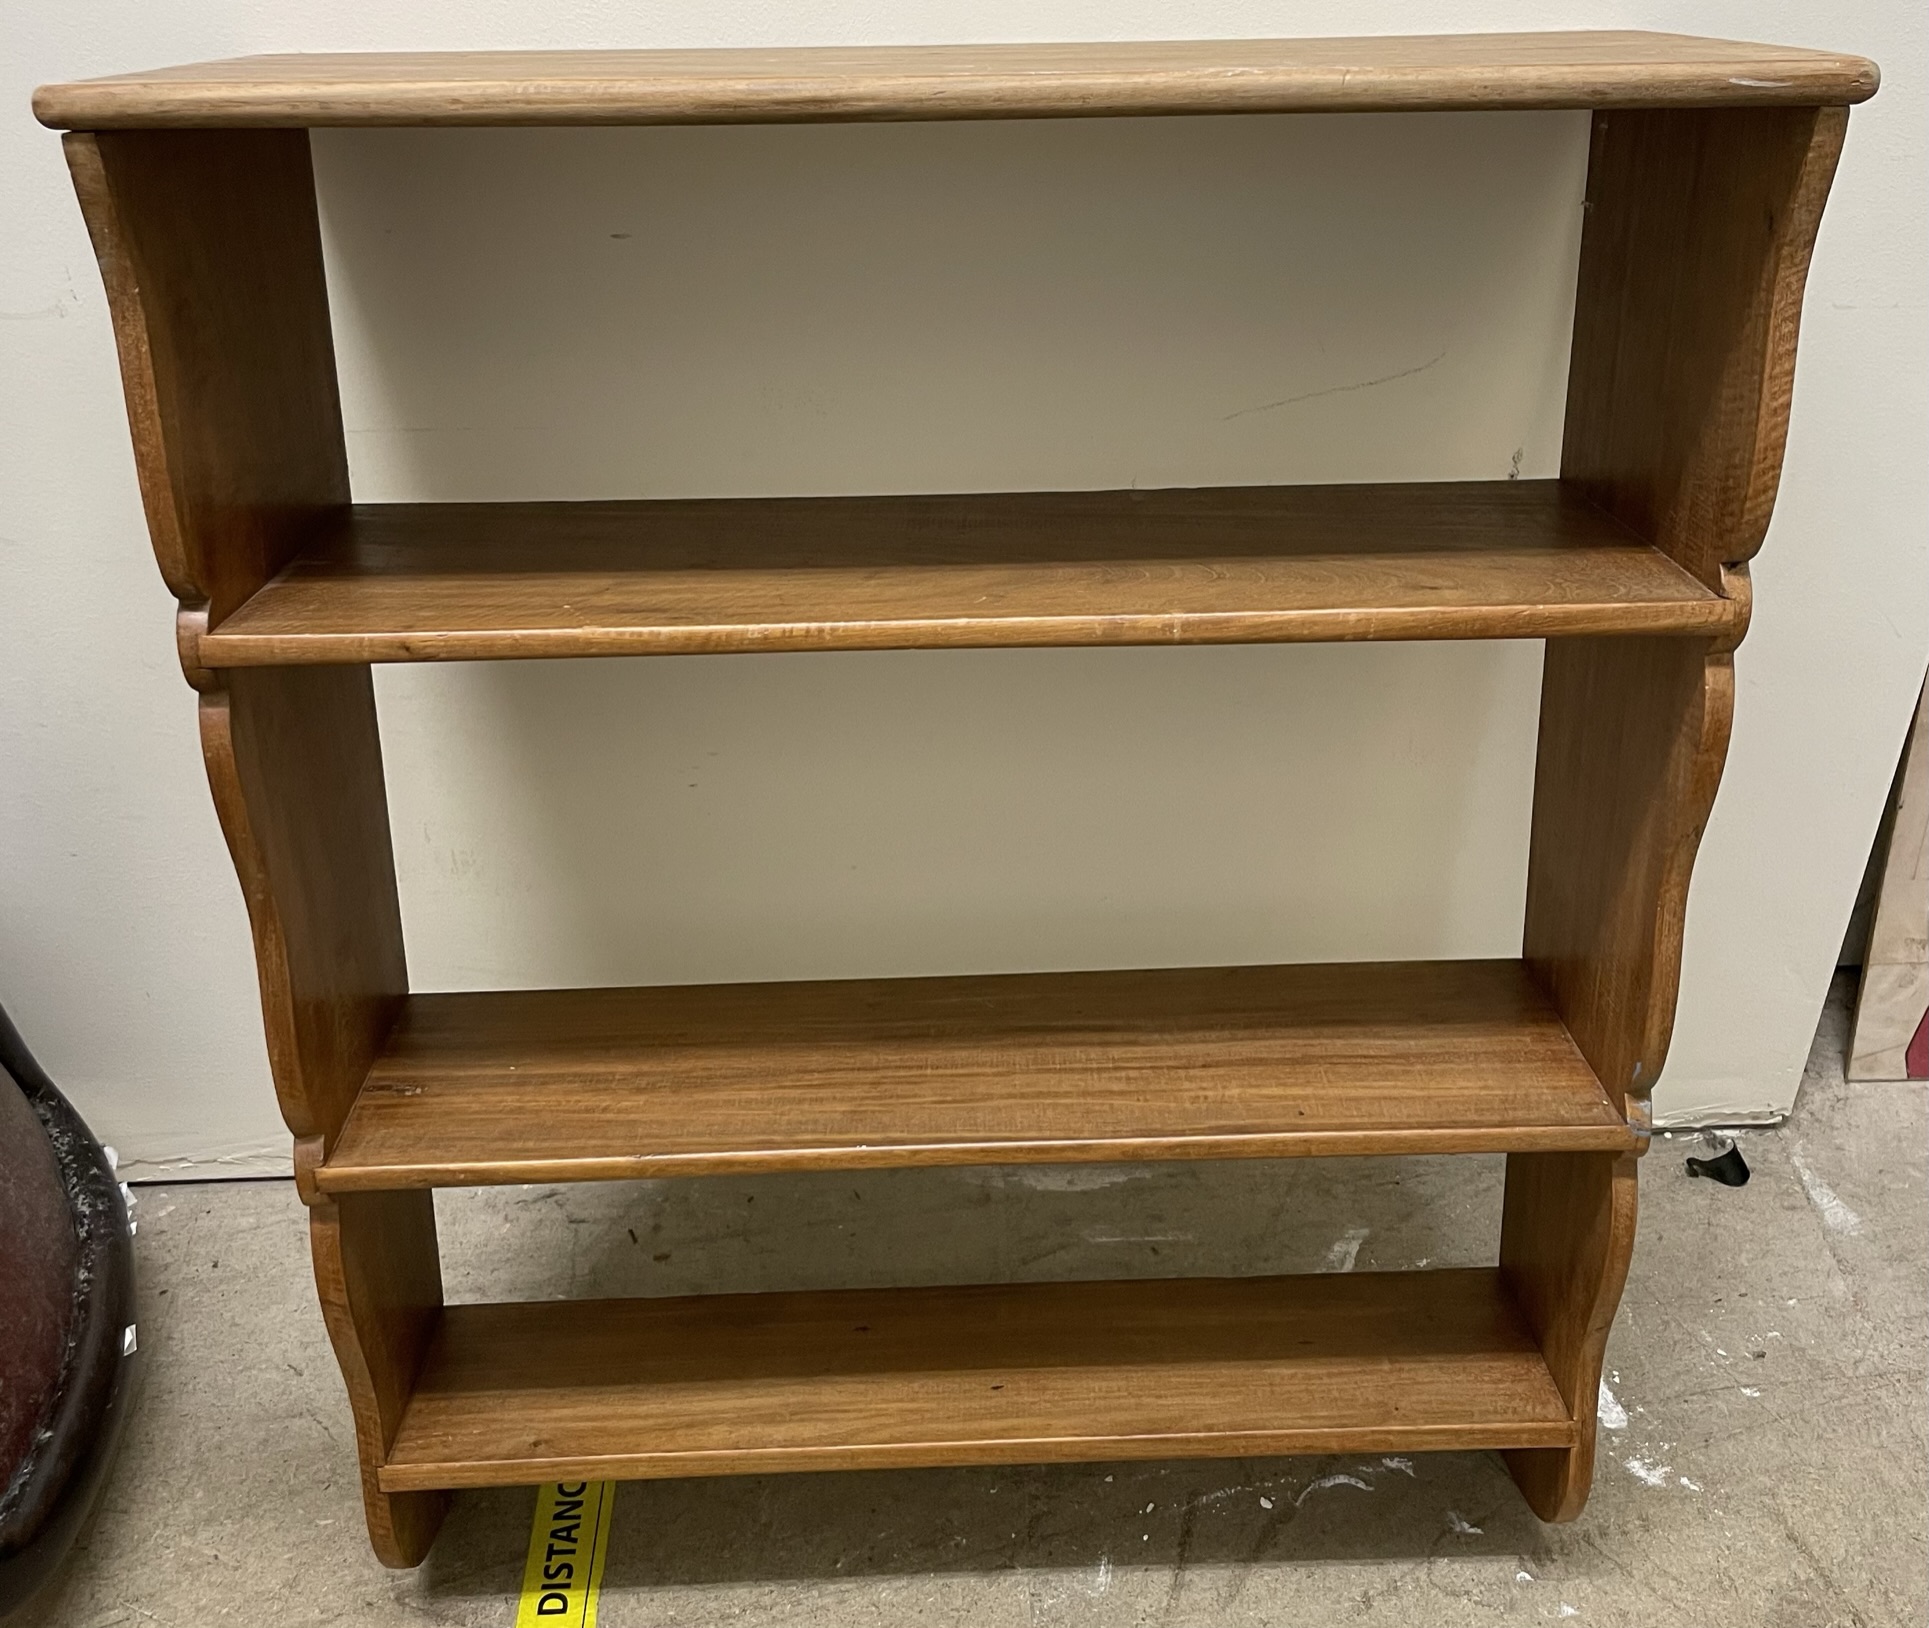 A mahogany waterfall bookcase with four shelves